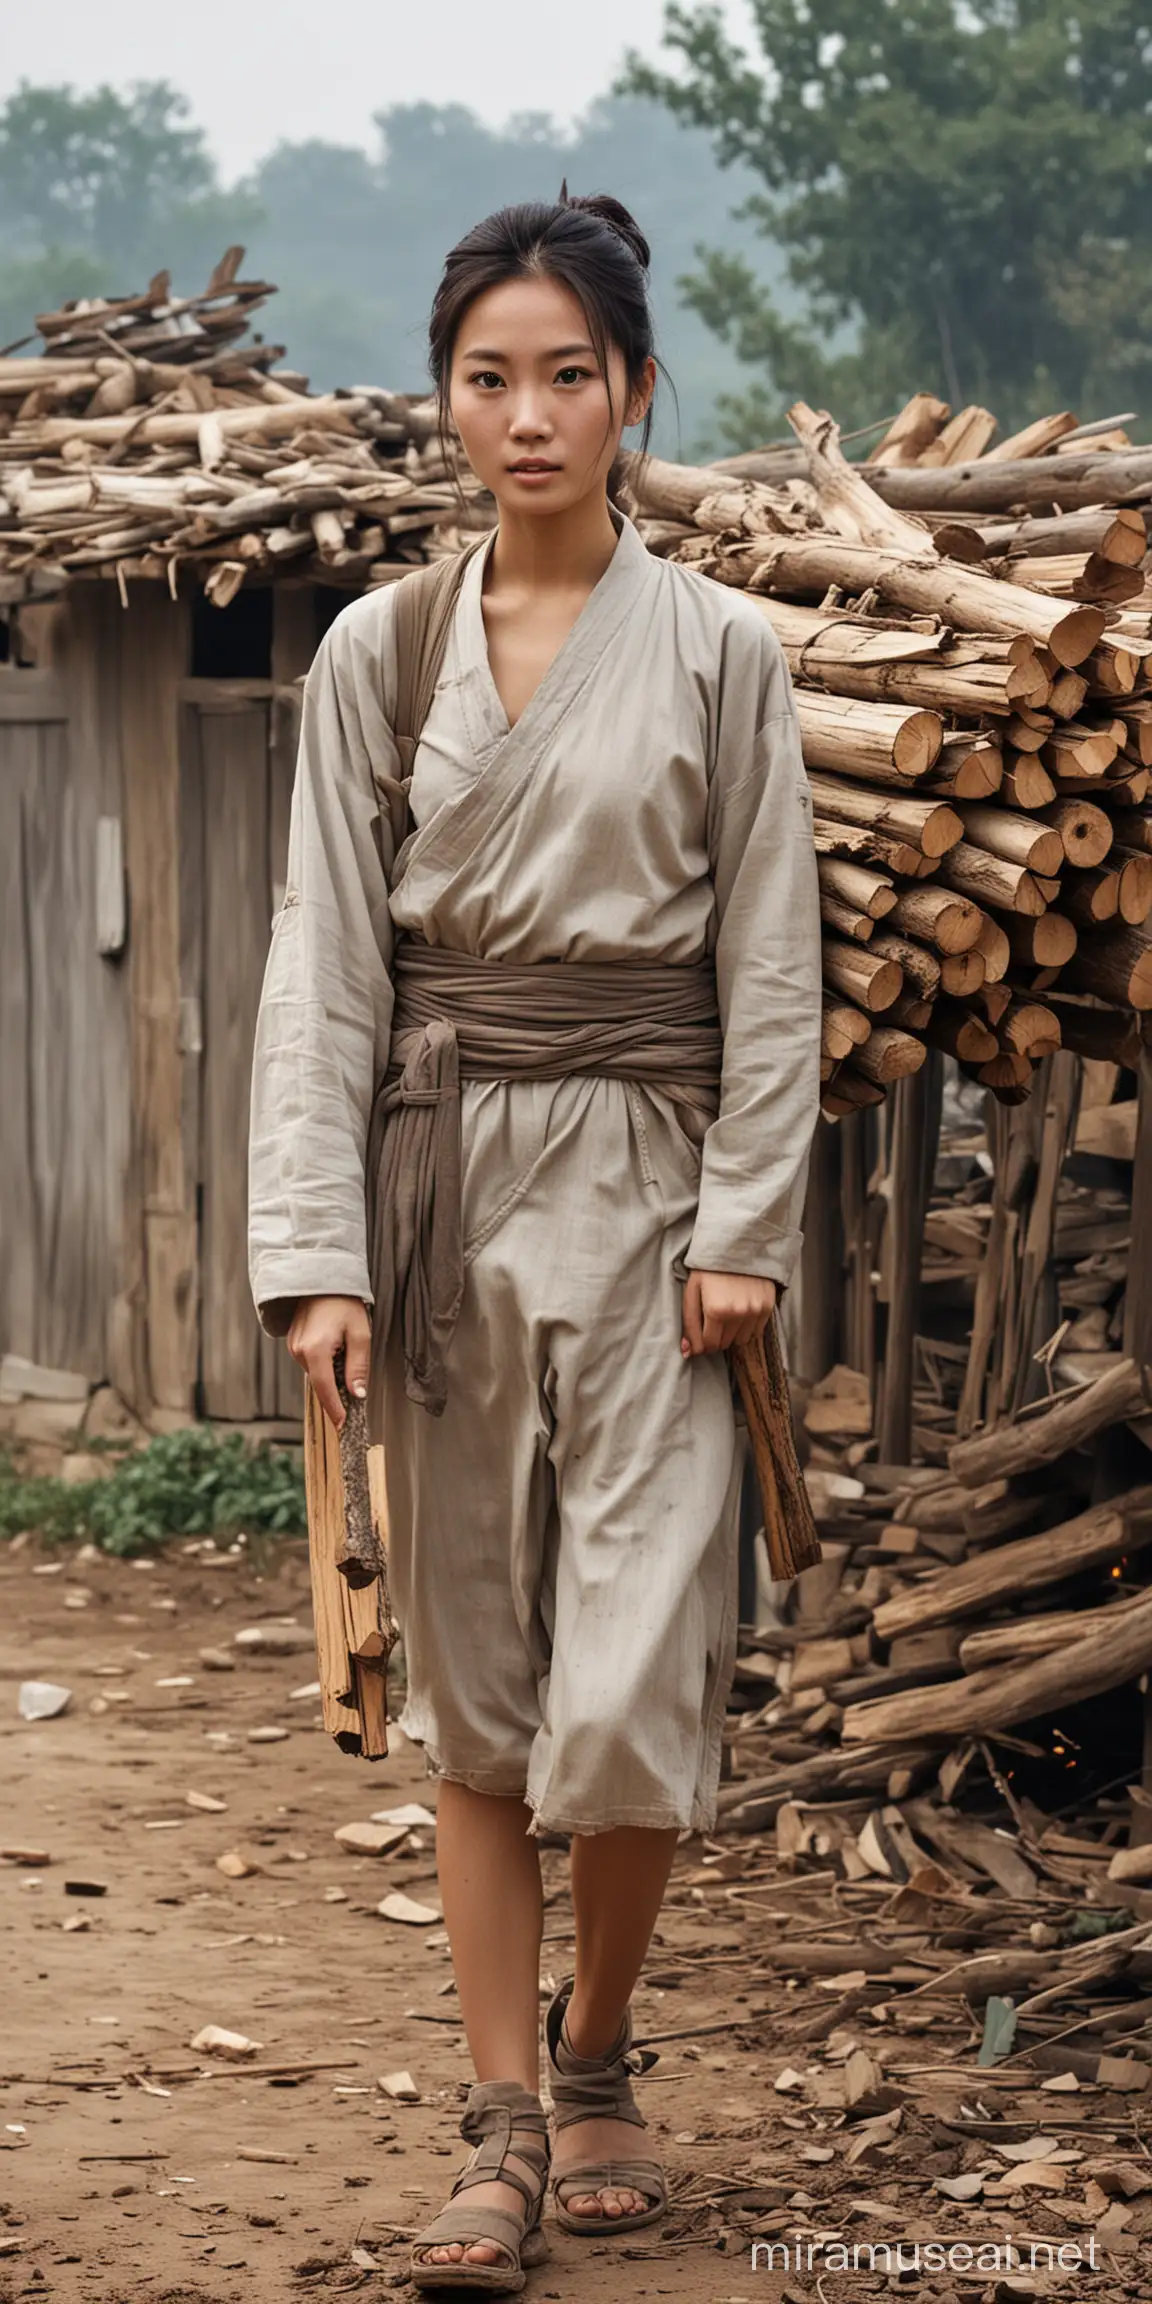 Rural Life Chinese Woman Carrying Firewood in a Dilapidated Dwelling